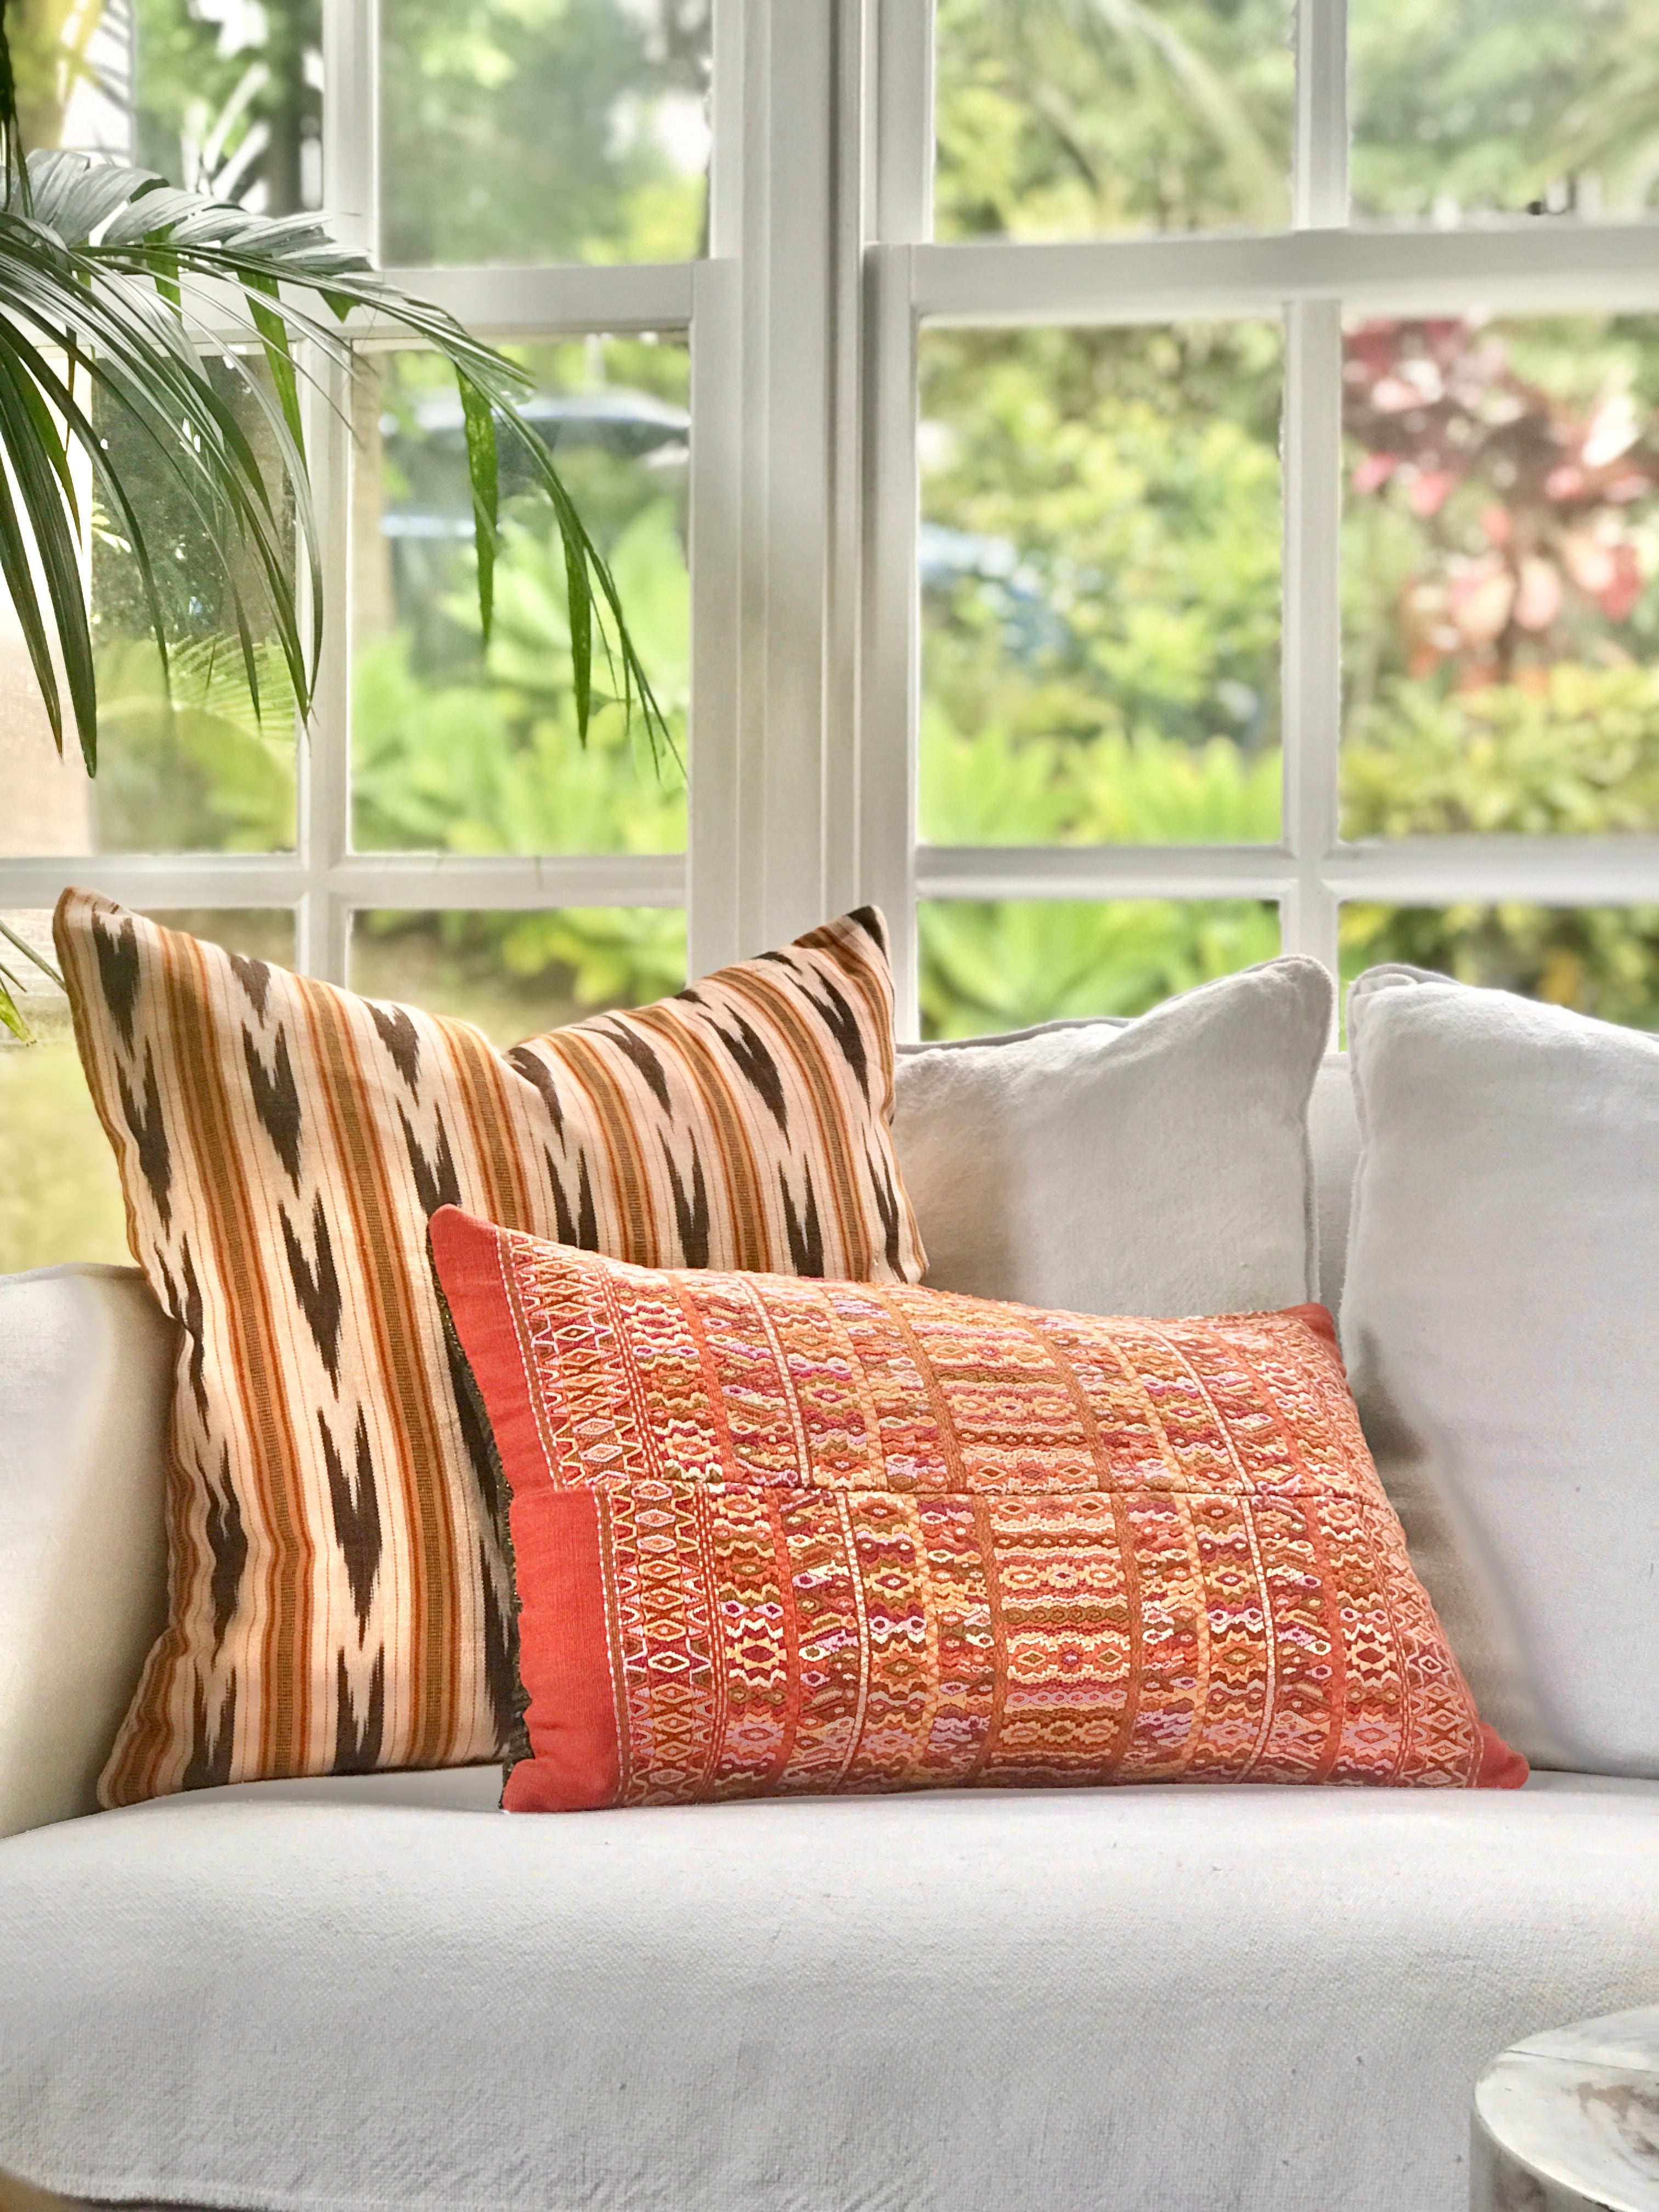 Vintage textile pillows made from a Guatemalan huipil and corte.